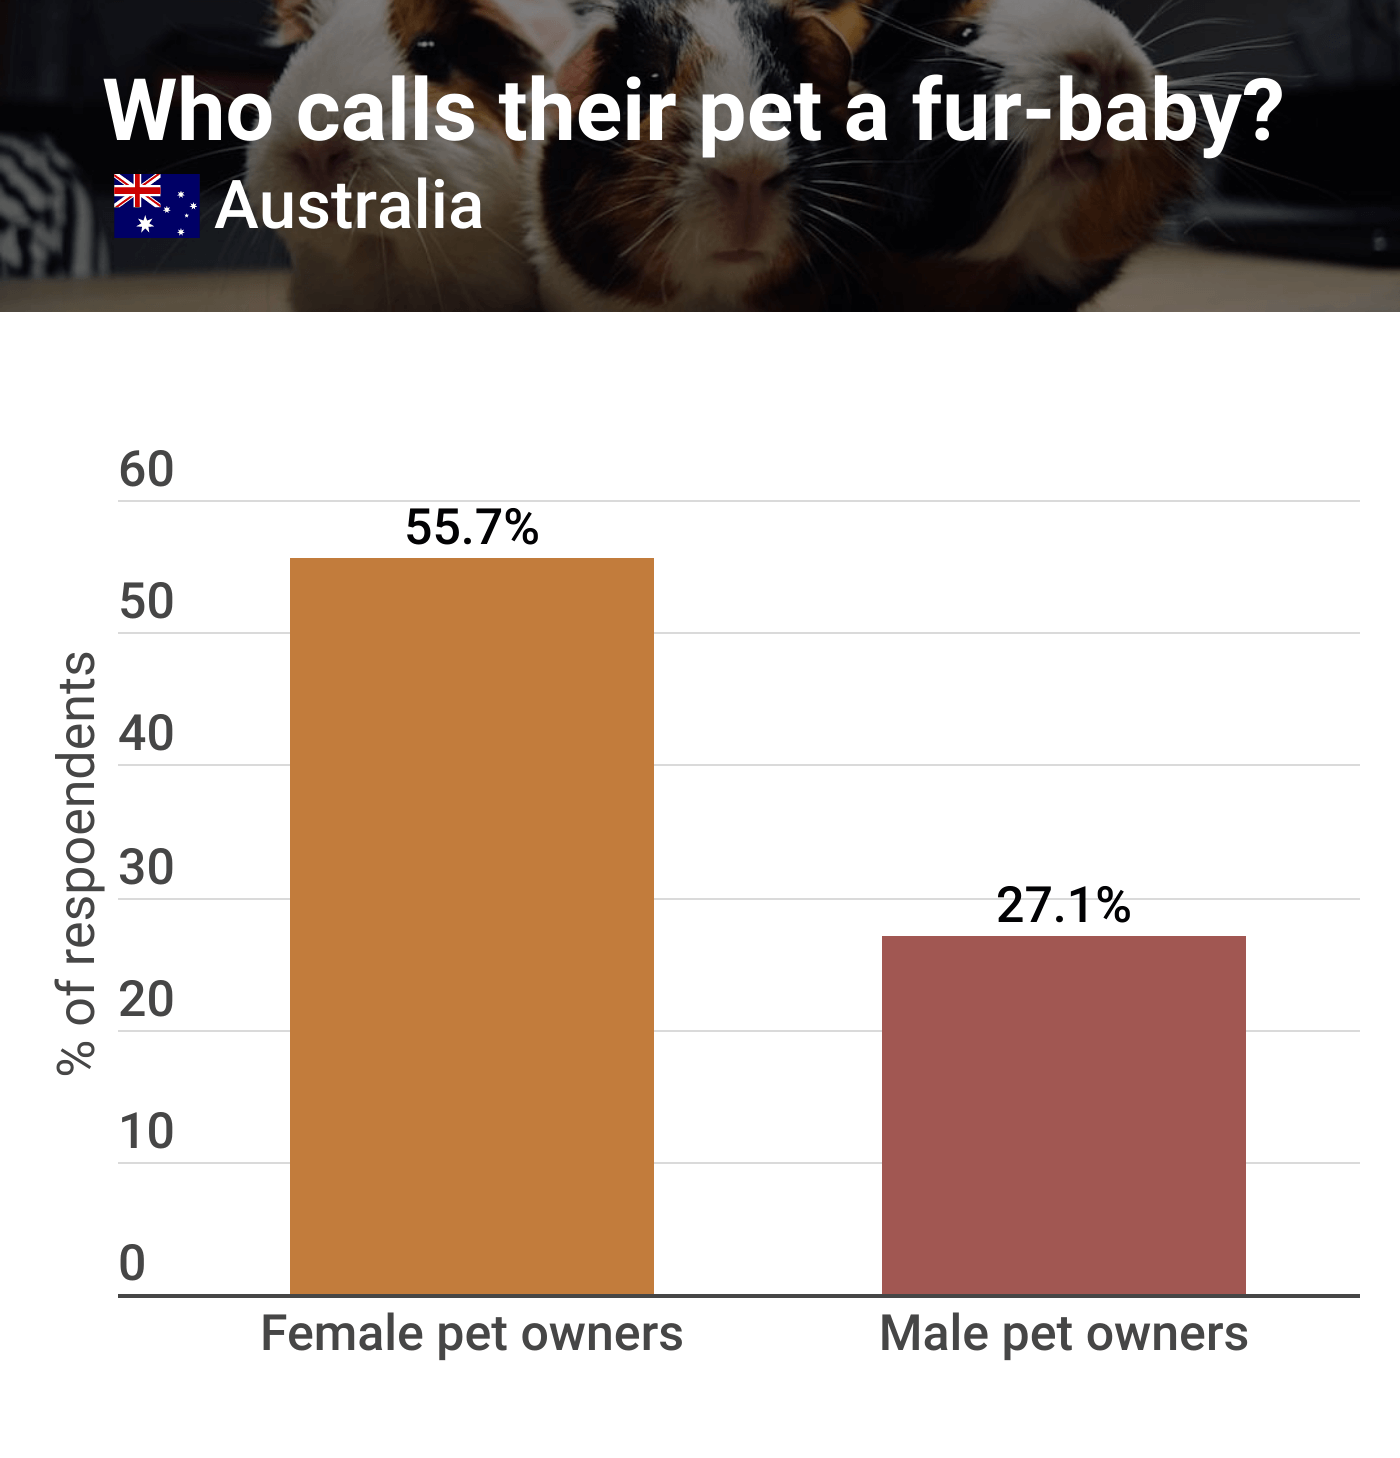 A graph of Australian pet owners who call their pets fur-babies, broken down by gender